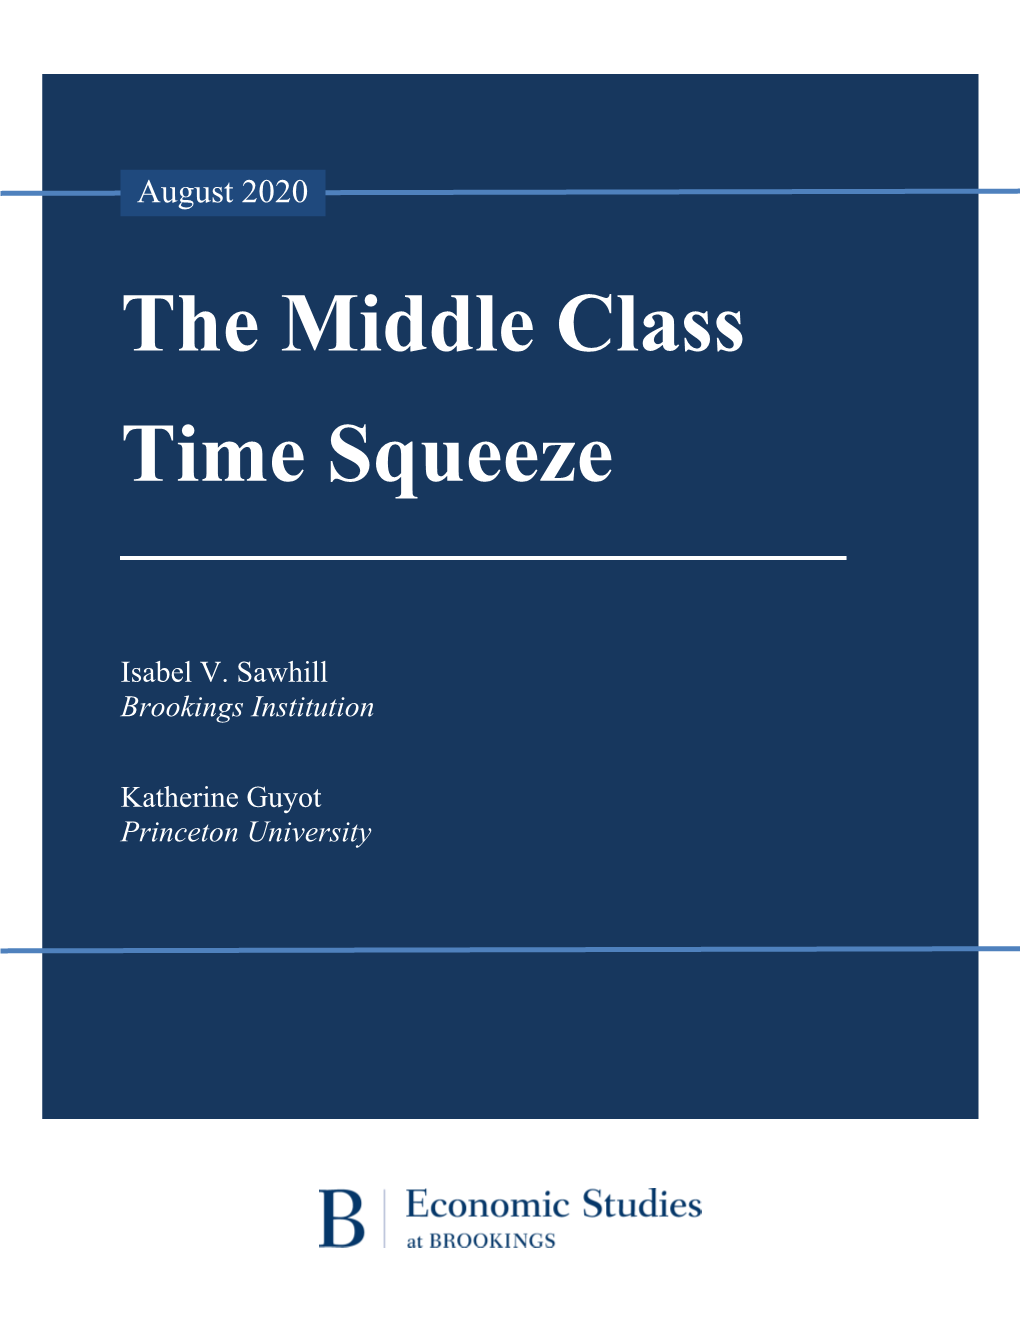 The Middle Class Time Squeeze